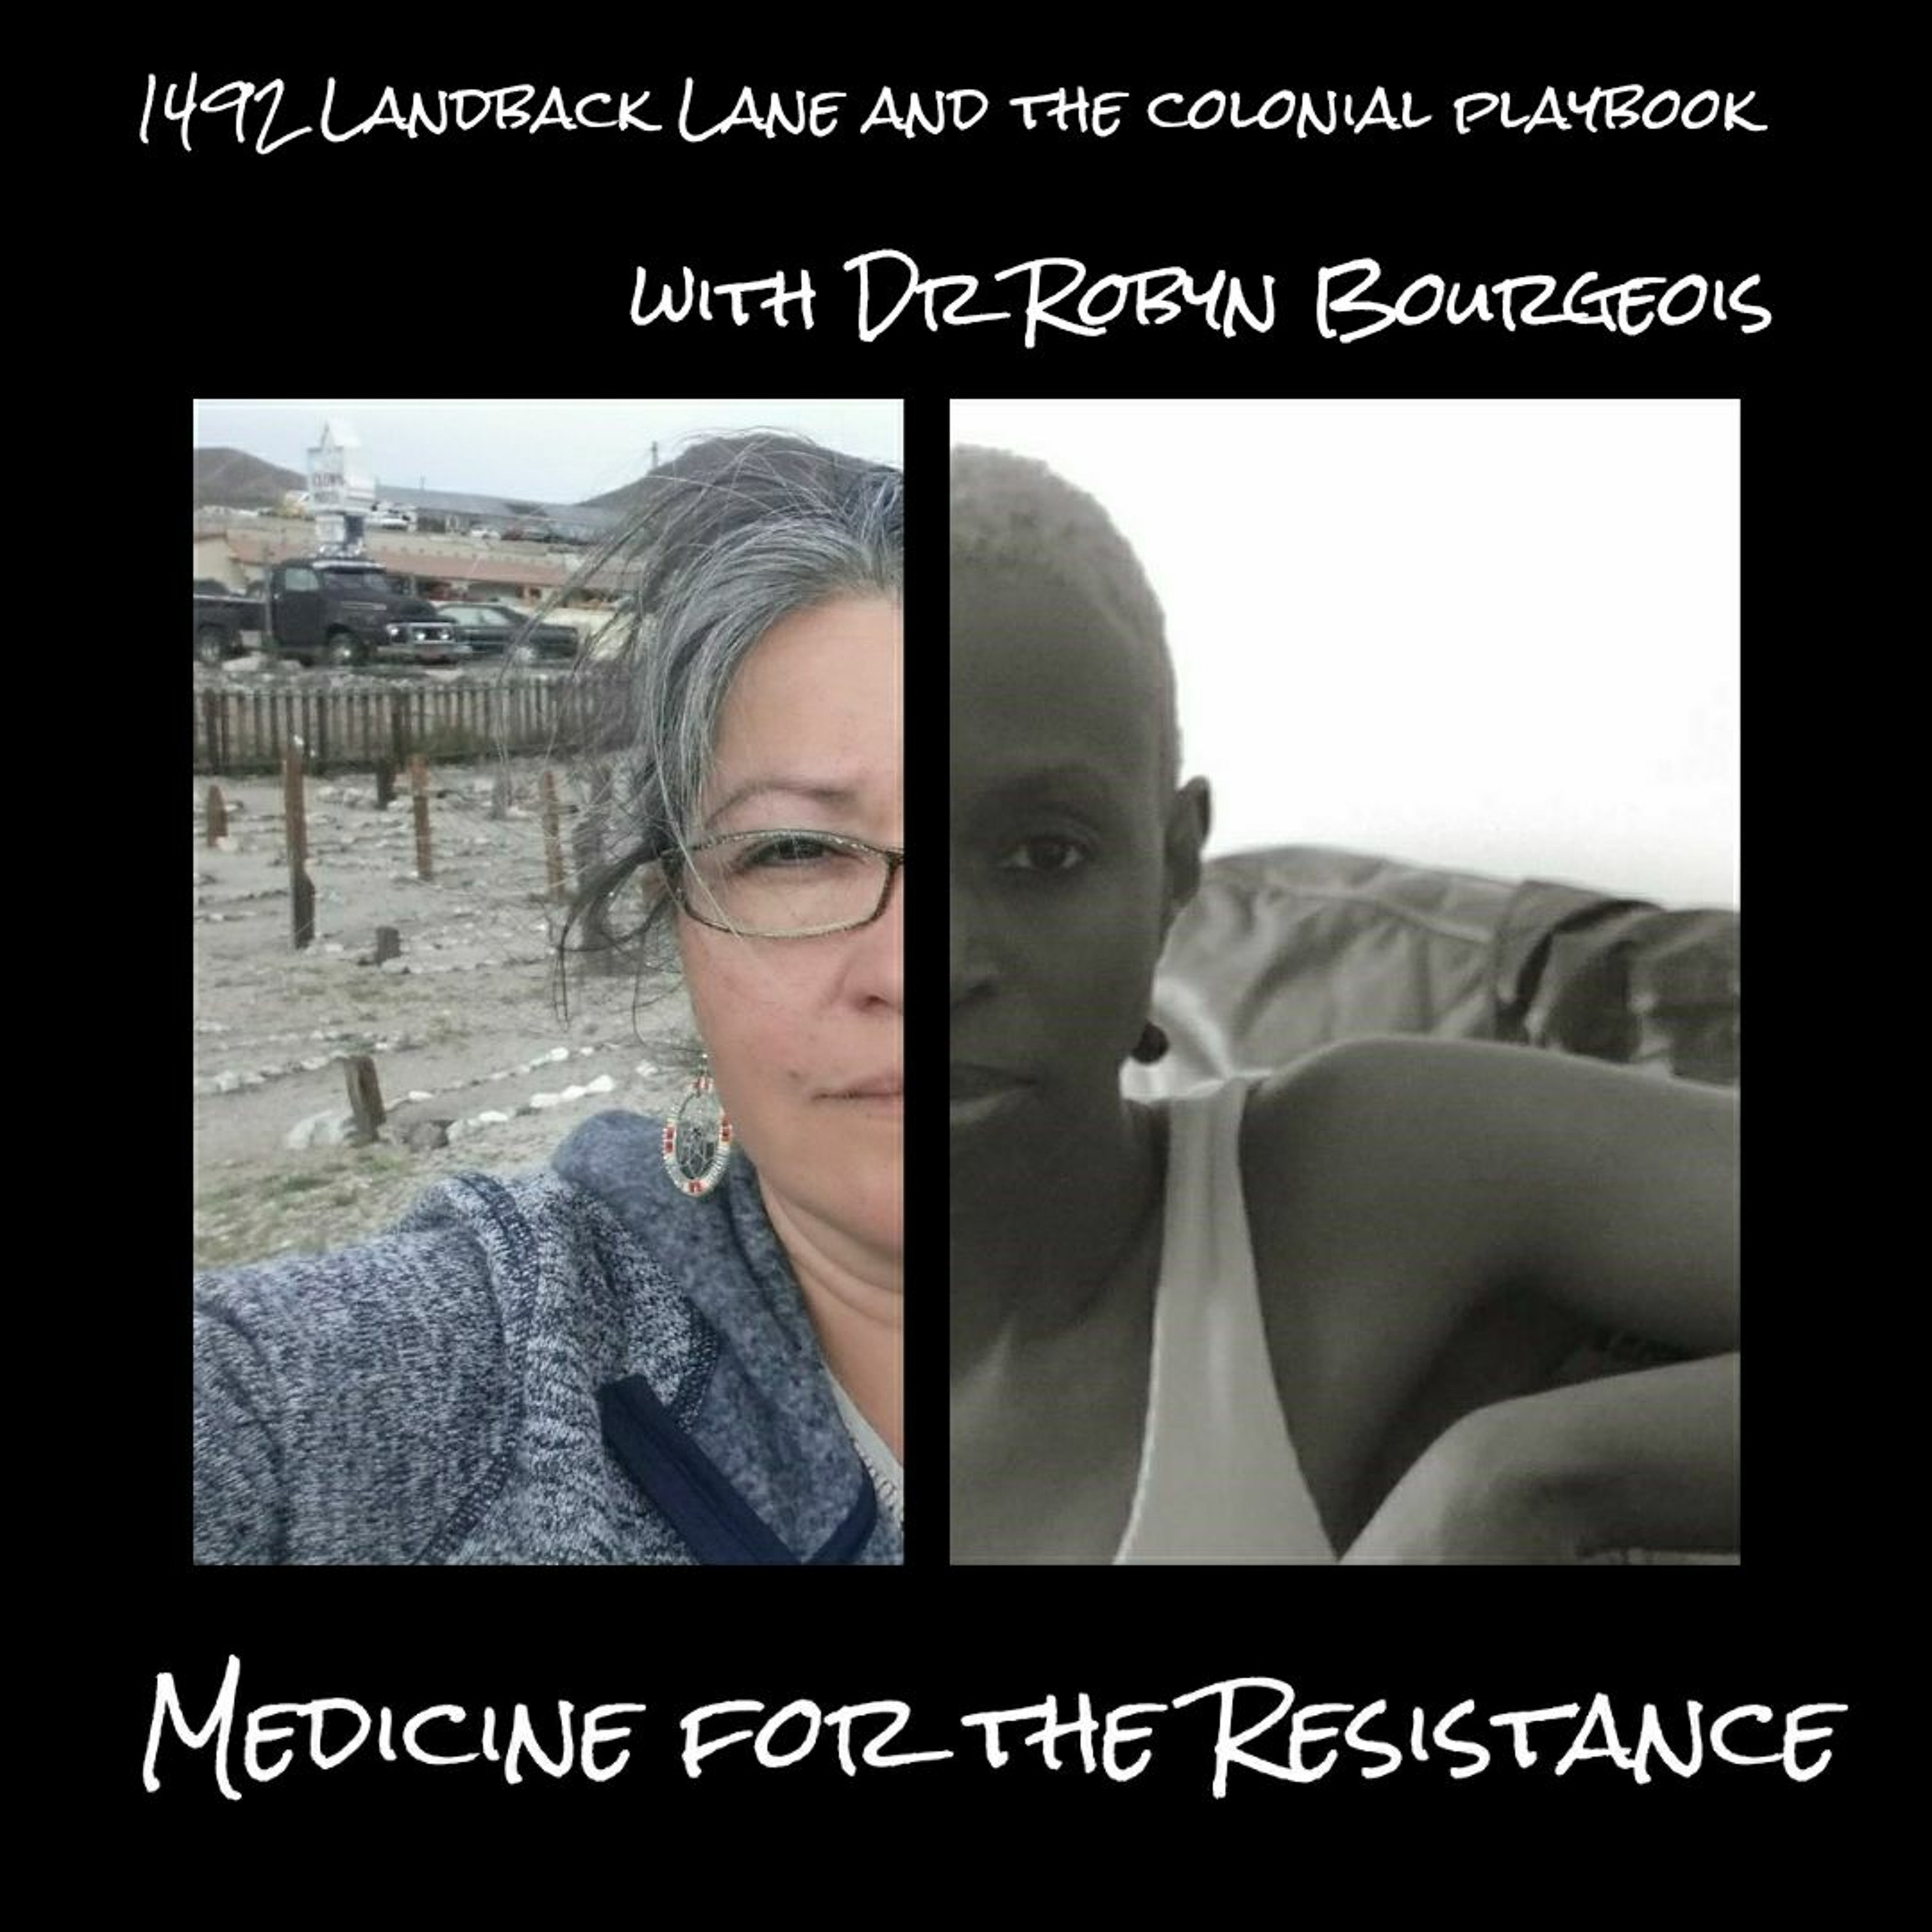 1492 Landback Lane and the colonial playbook with Dr. Robyn Bourgeois